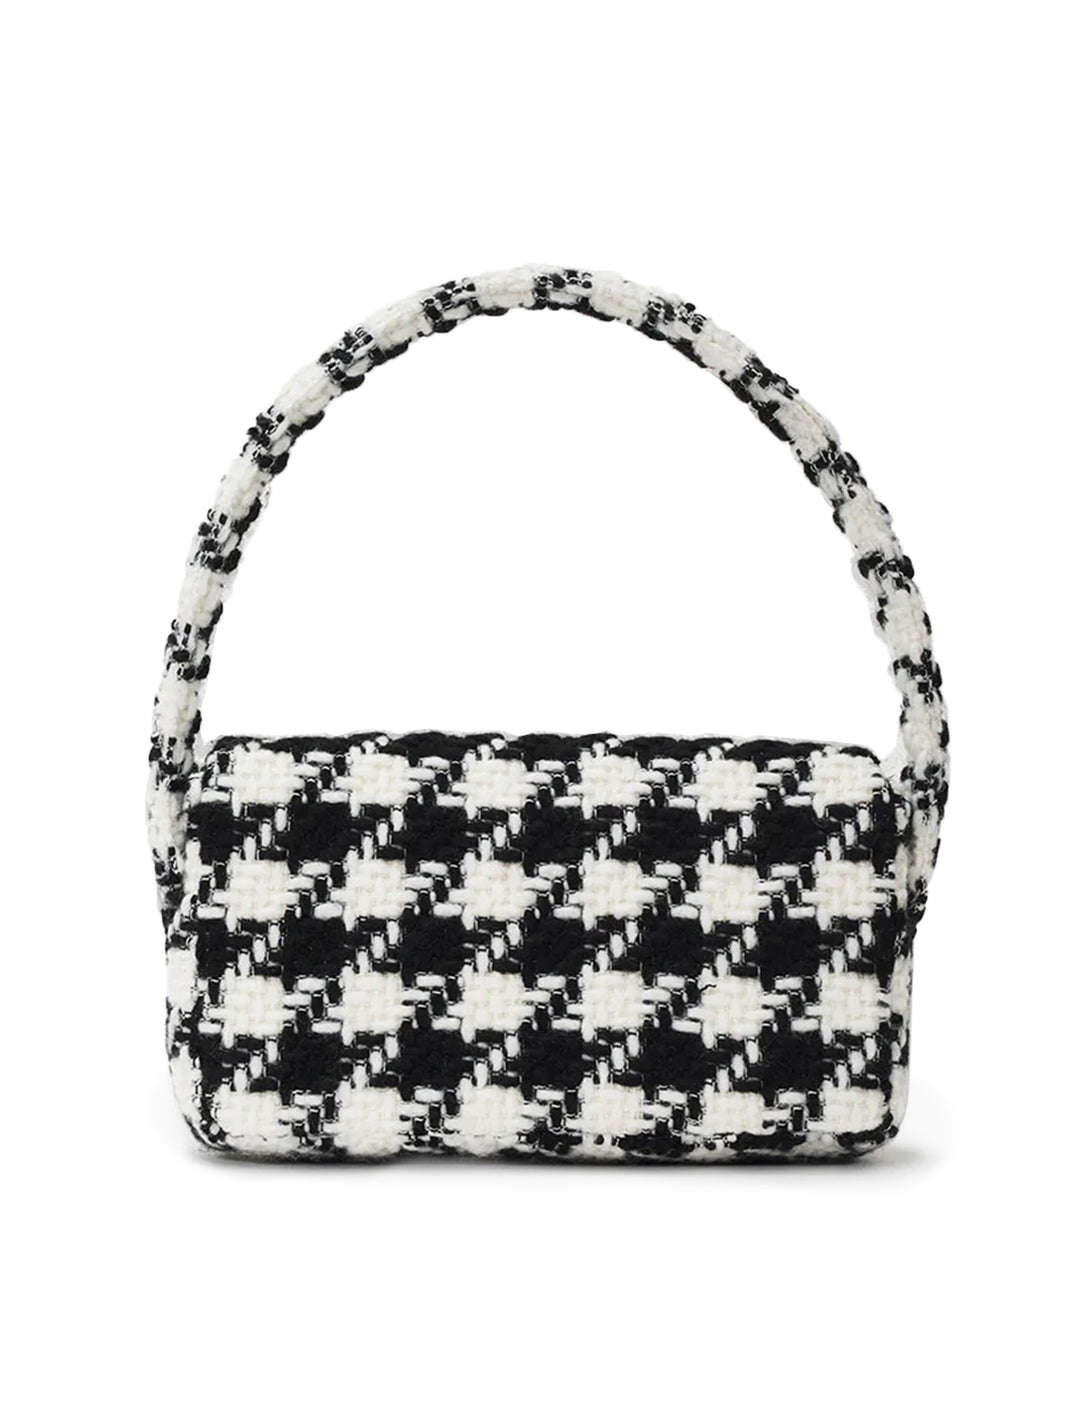 Back view of Anine Bing's nico handbag in black and white houndstooth.